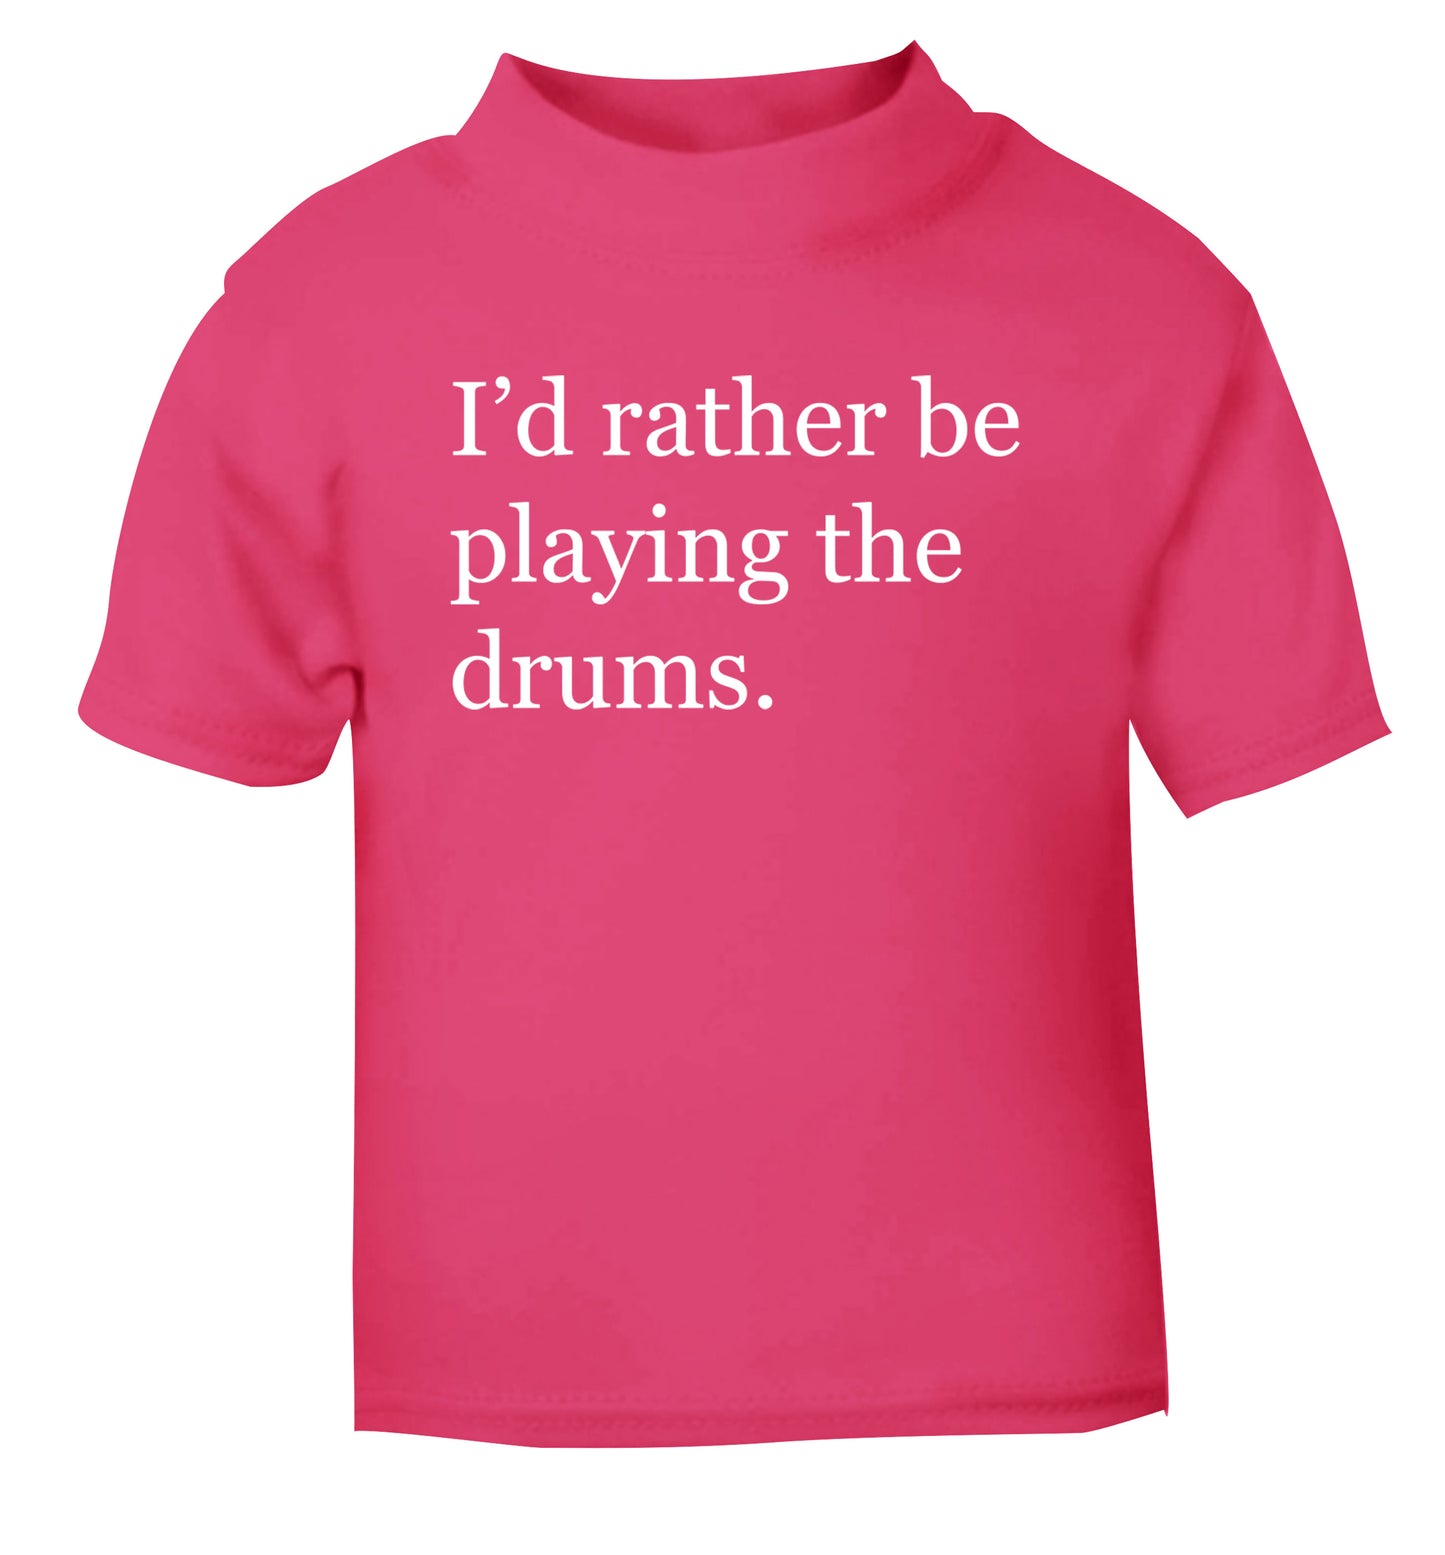 I'd rather be playing the drums pink Baby Toddler Tshirt 2 Years